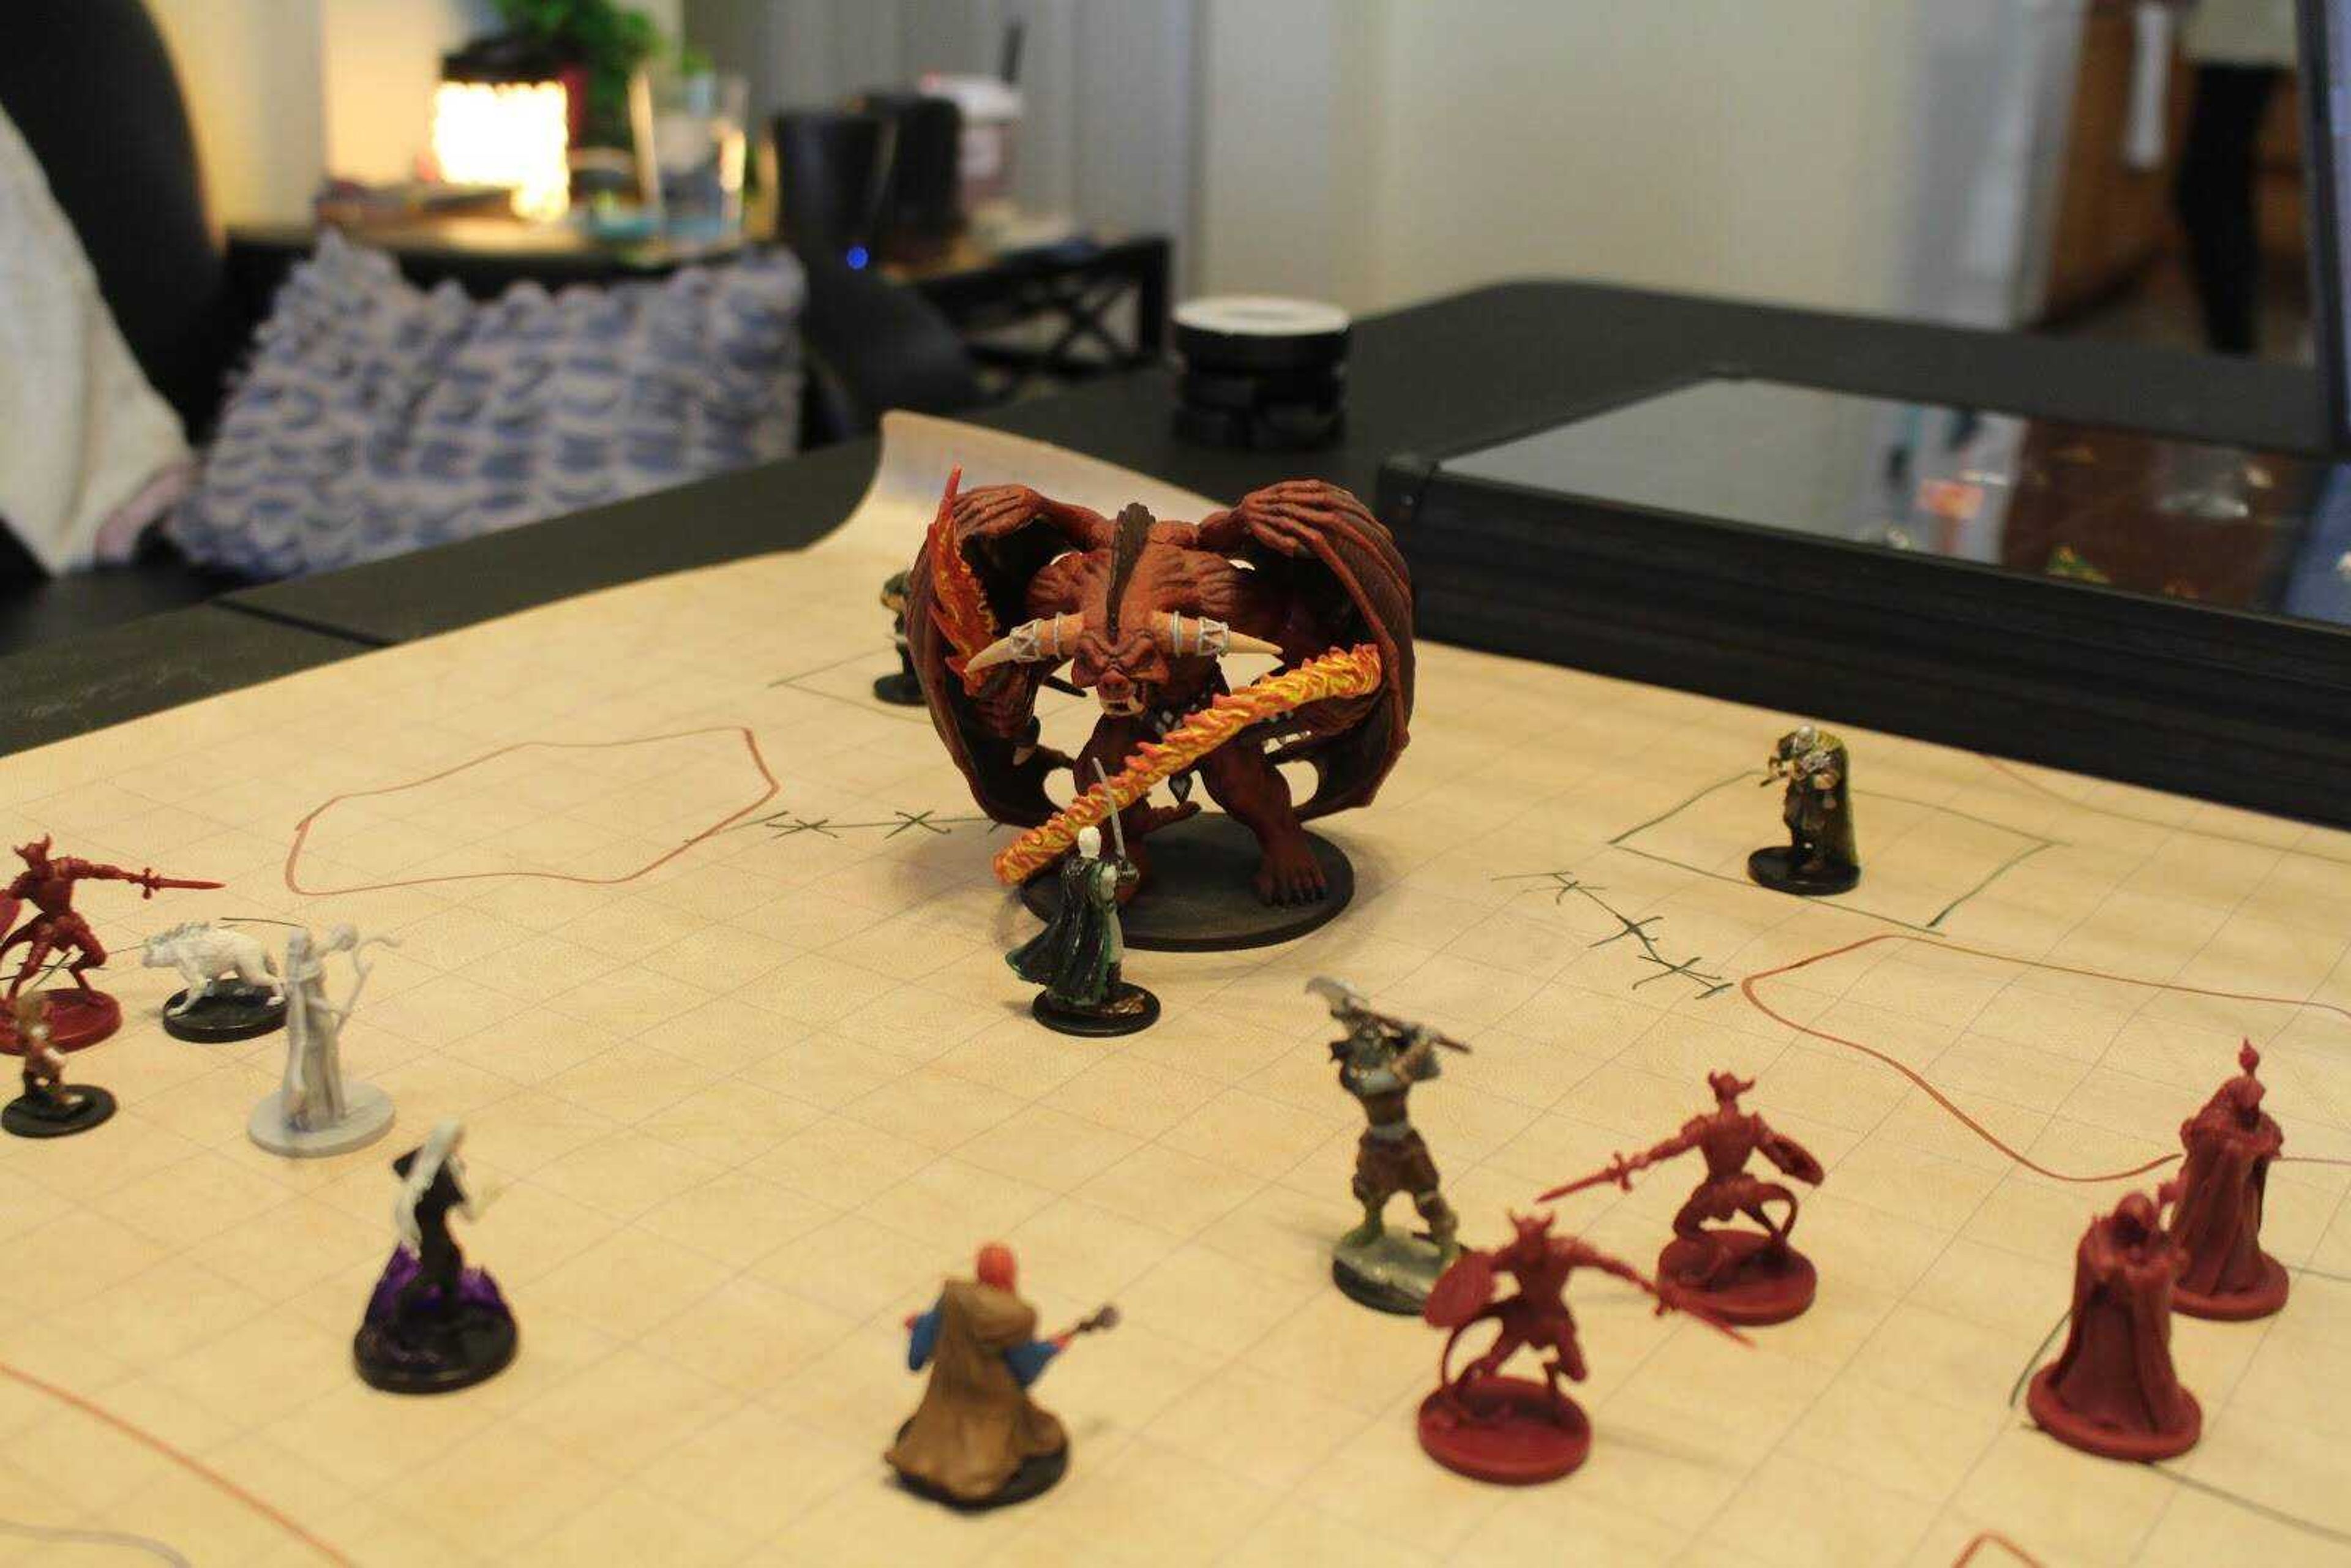 Southeast DND group grows in popularity among students